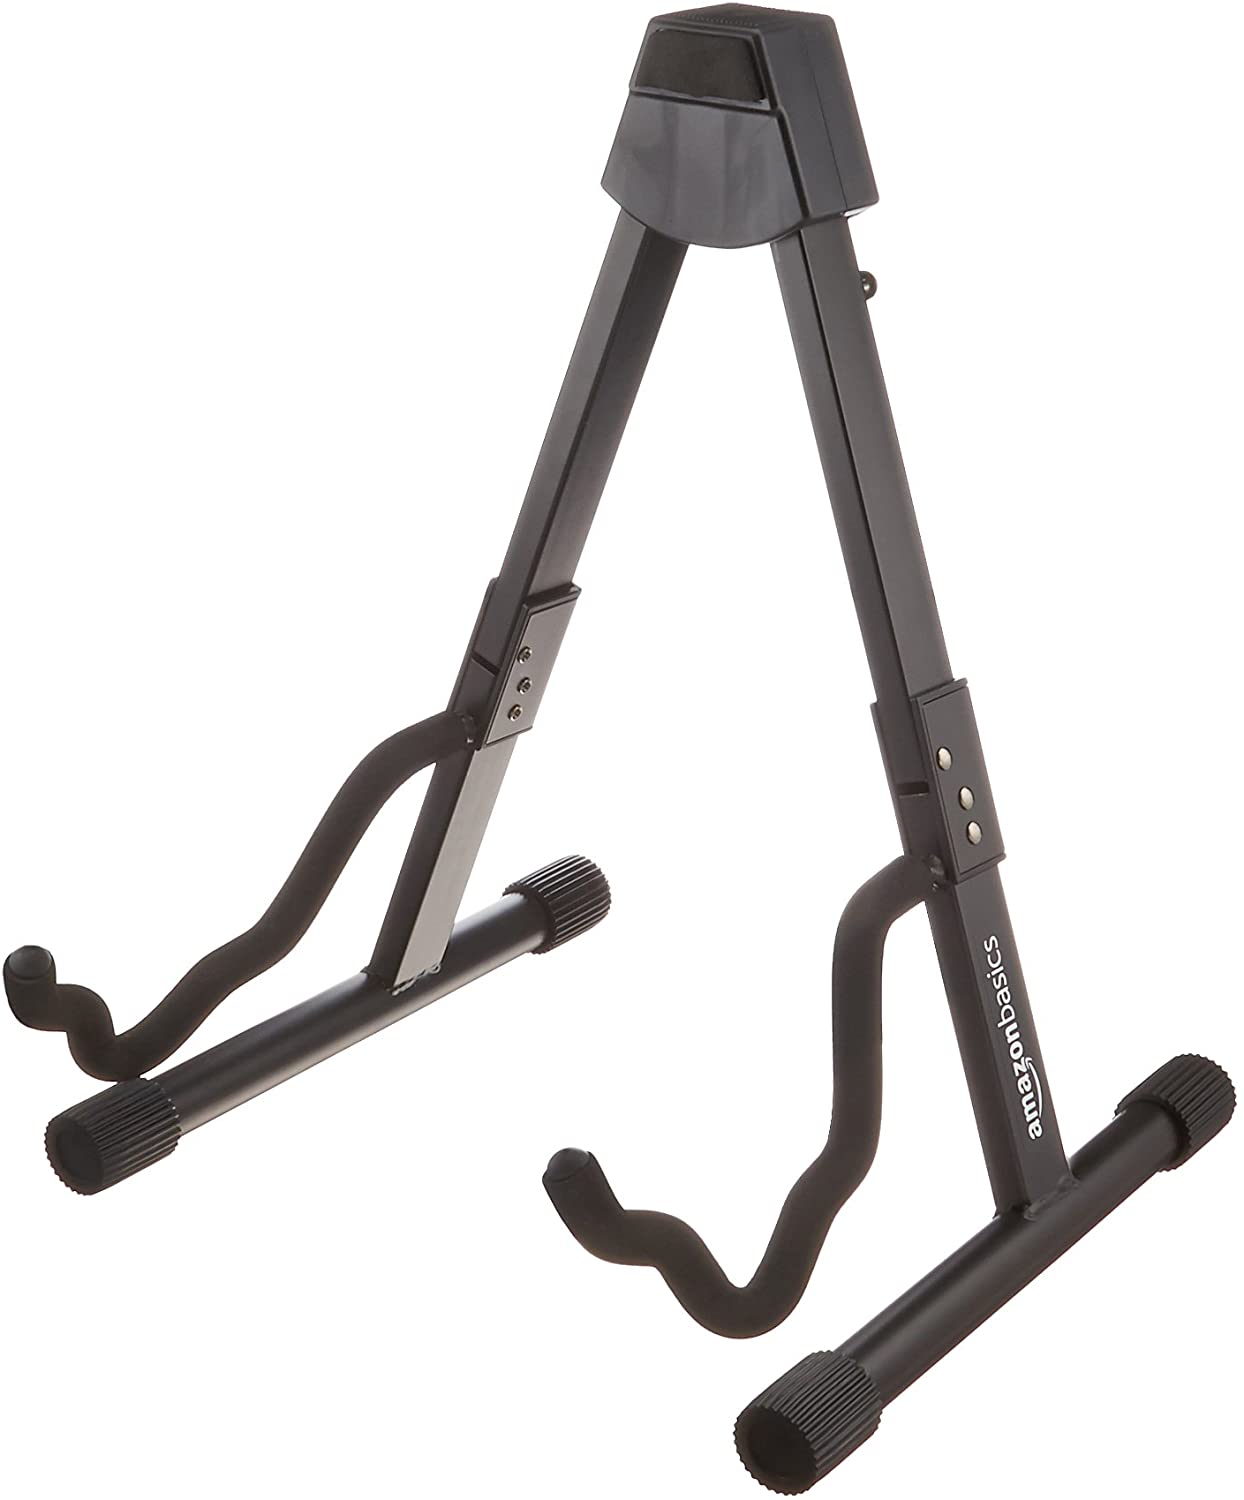 Amazon Basic Folding A- frame stand: The Best Banjo Stand